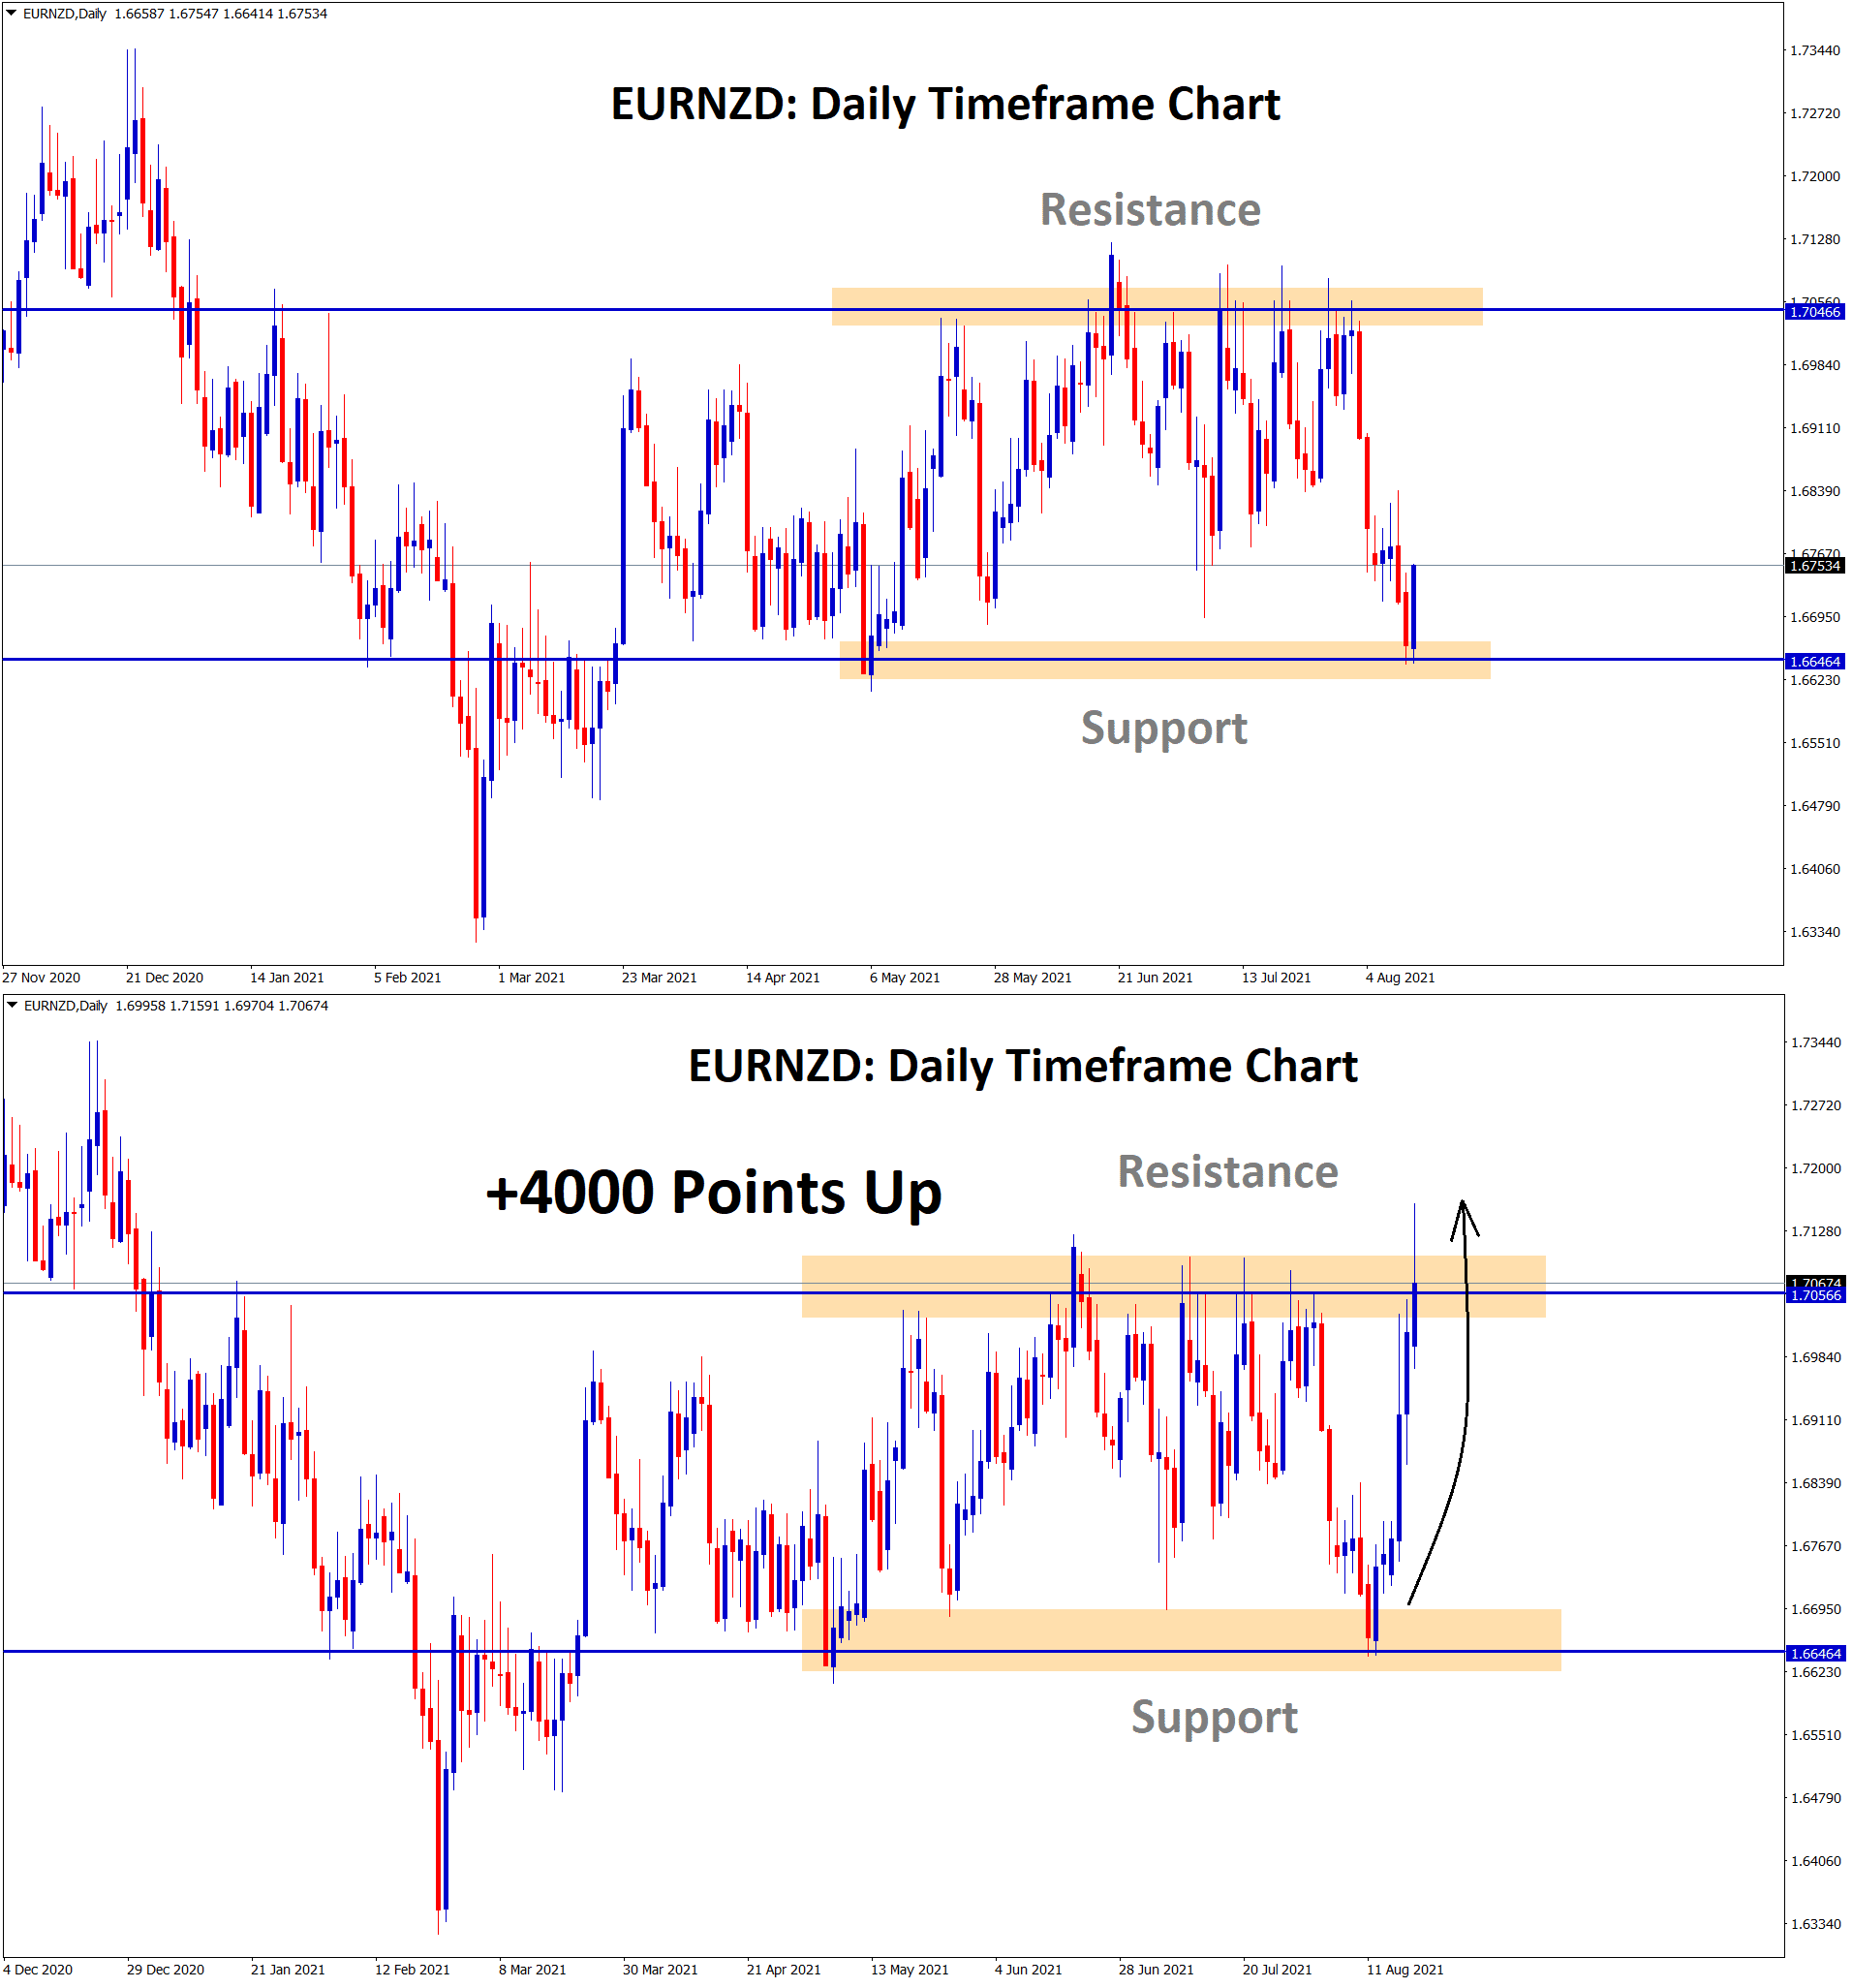 EURNZD rebound 4000 points from the support